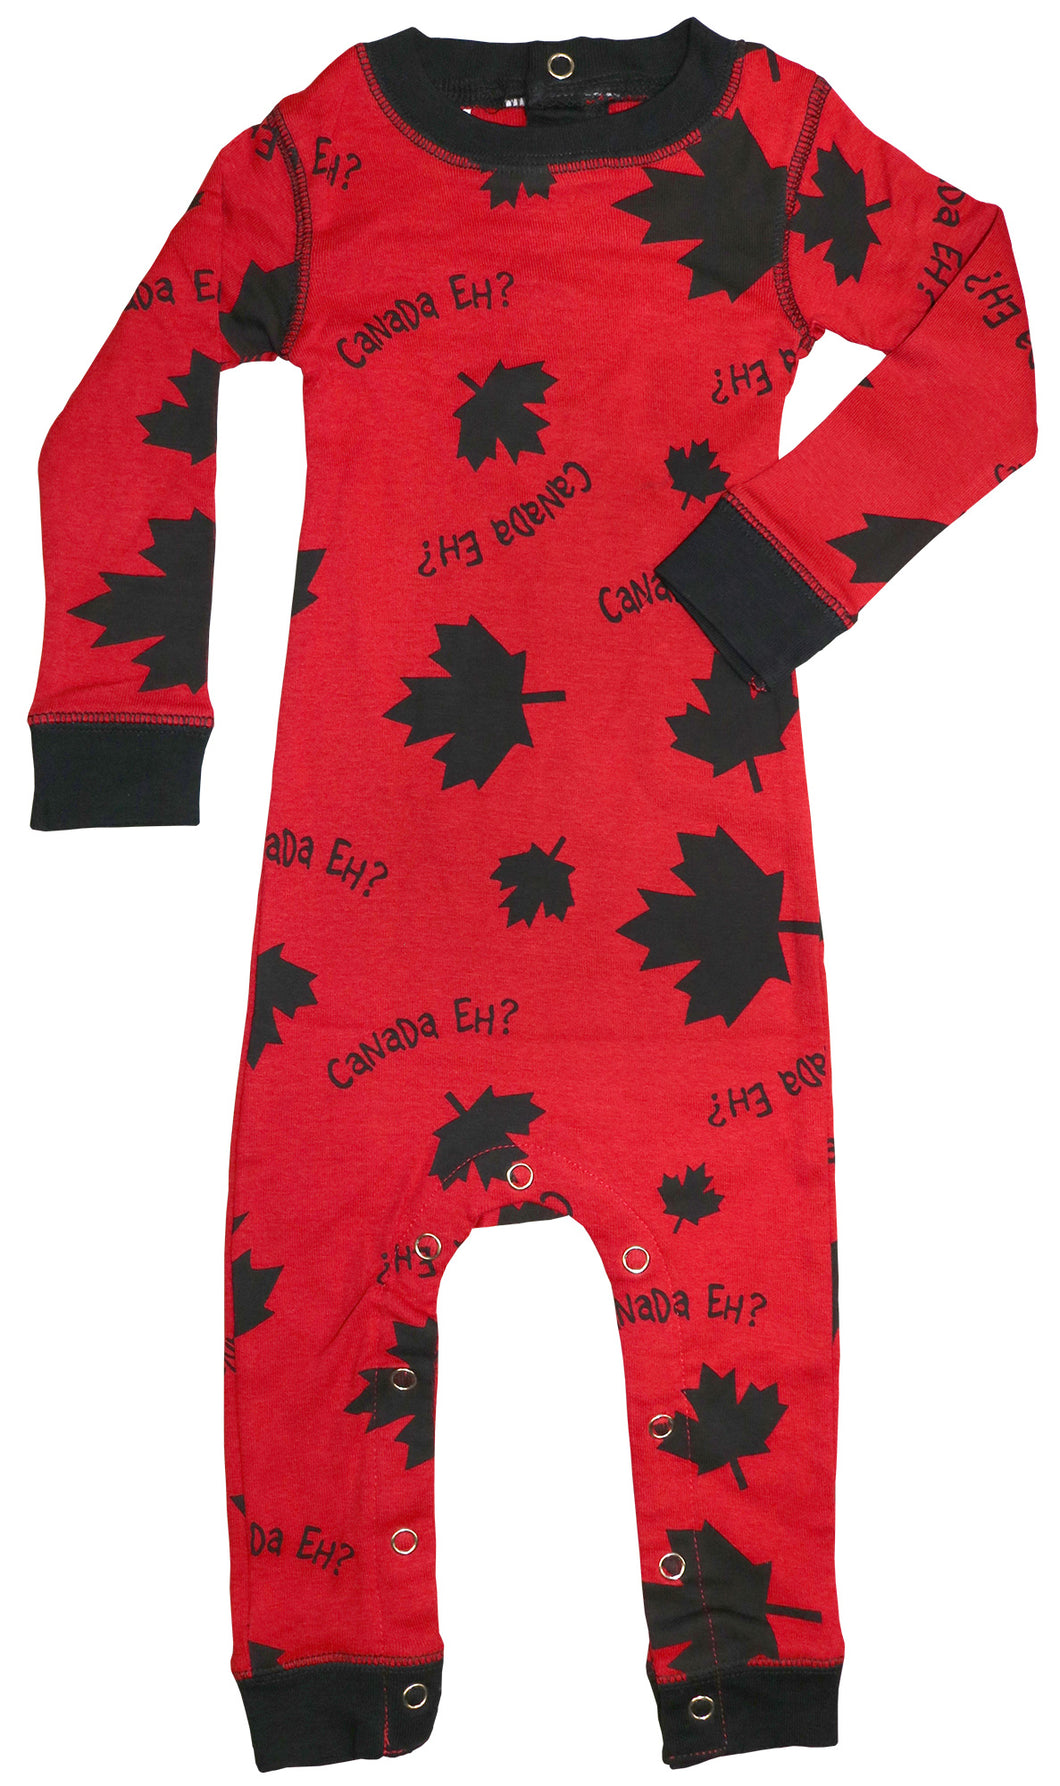 Canada Eh? Red Infant Union Suit